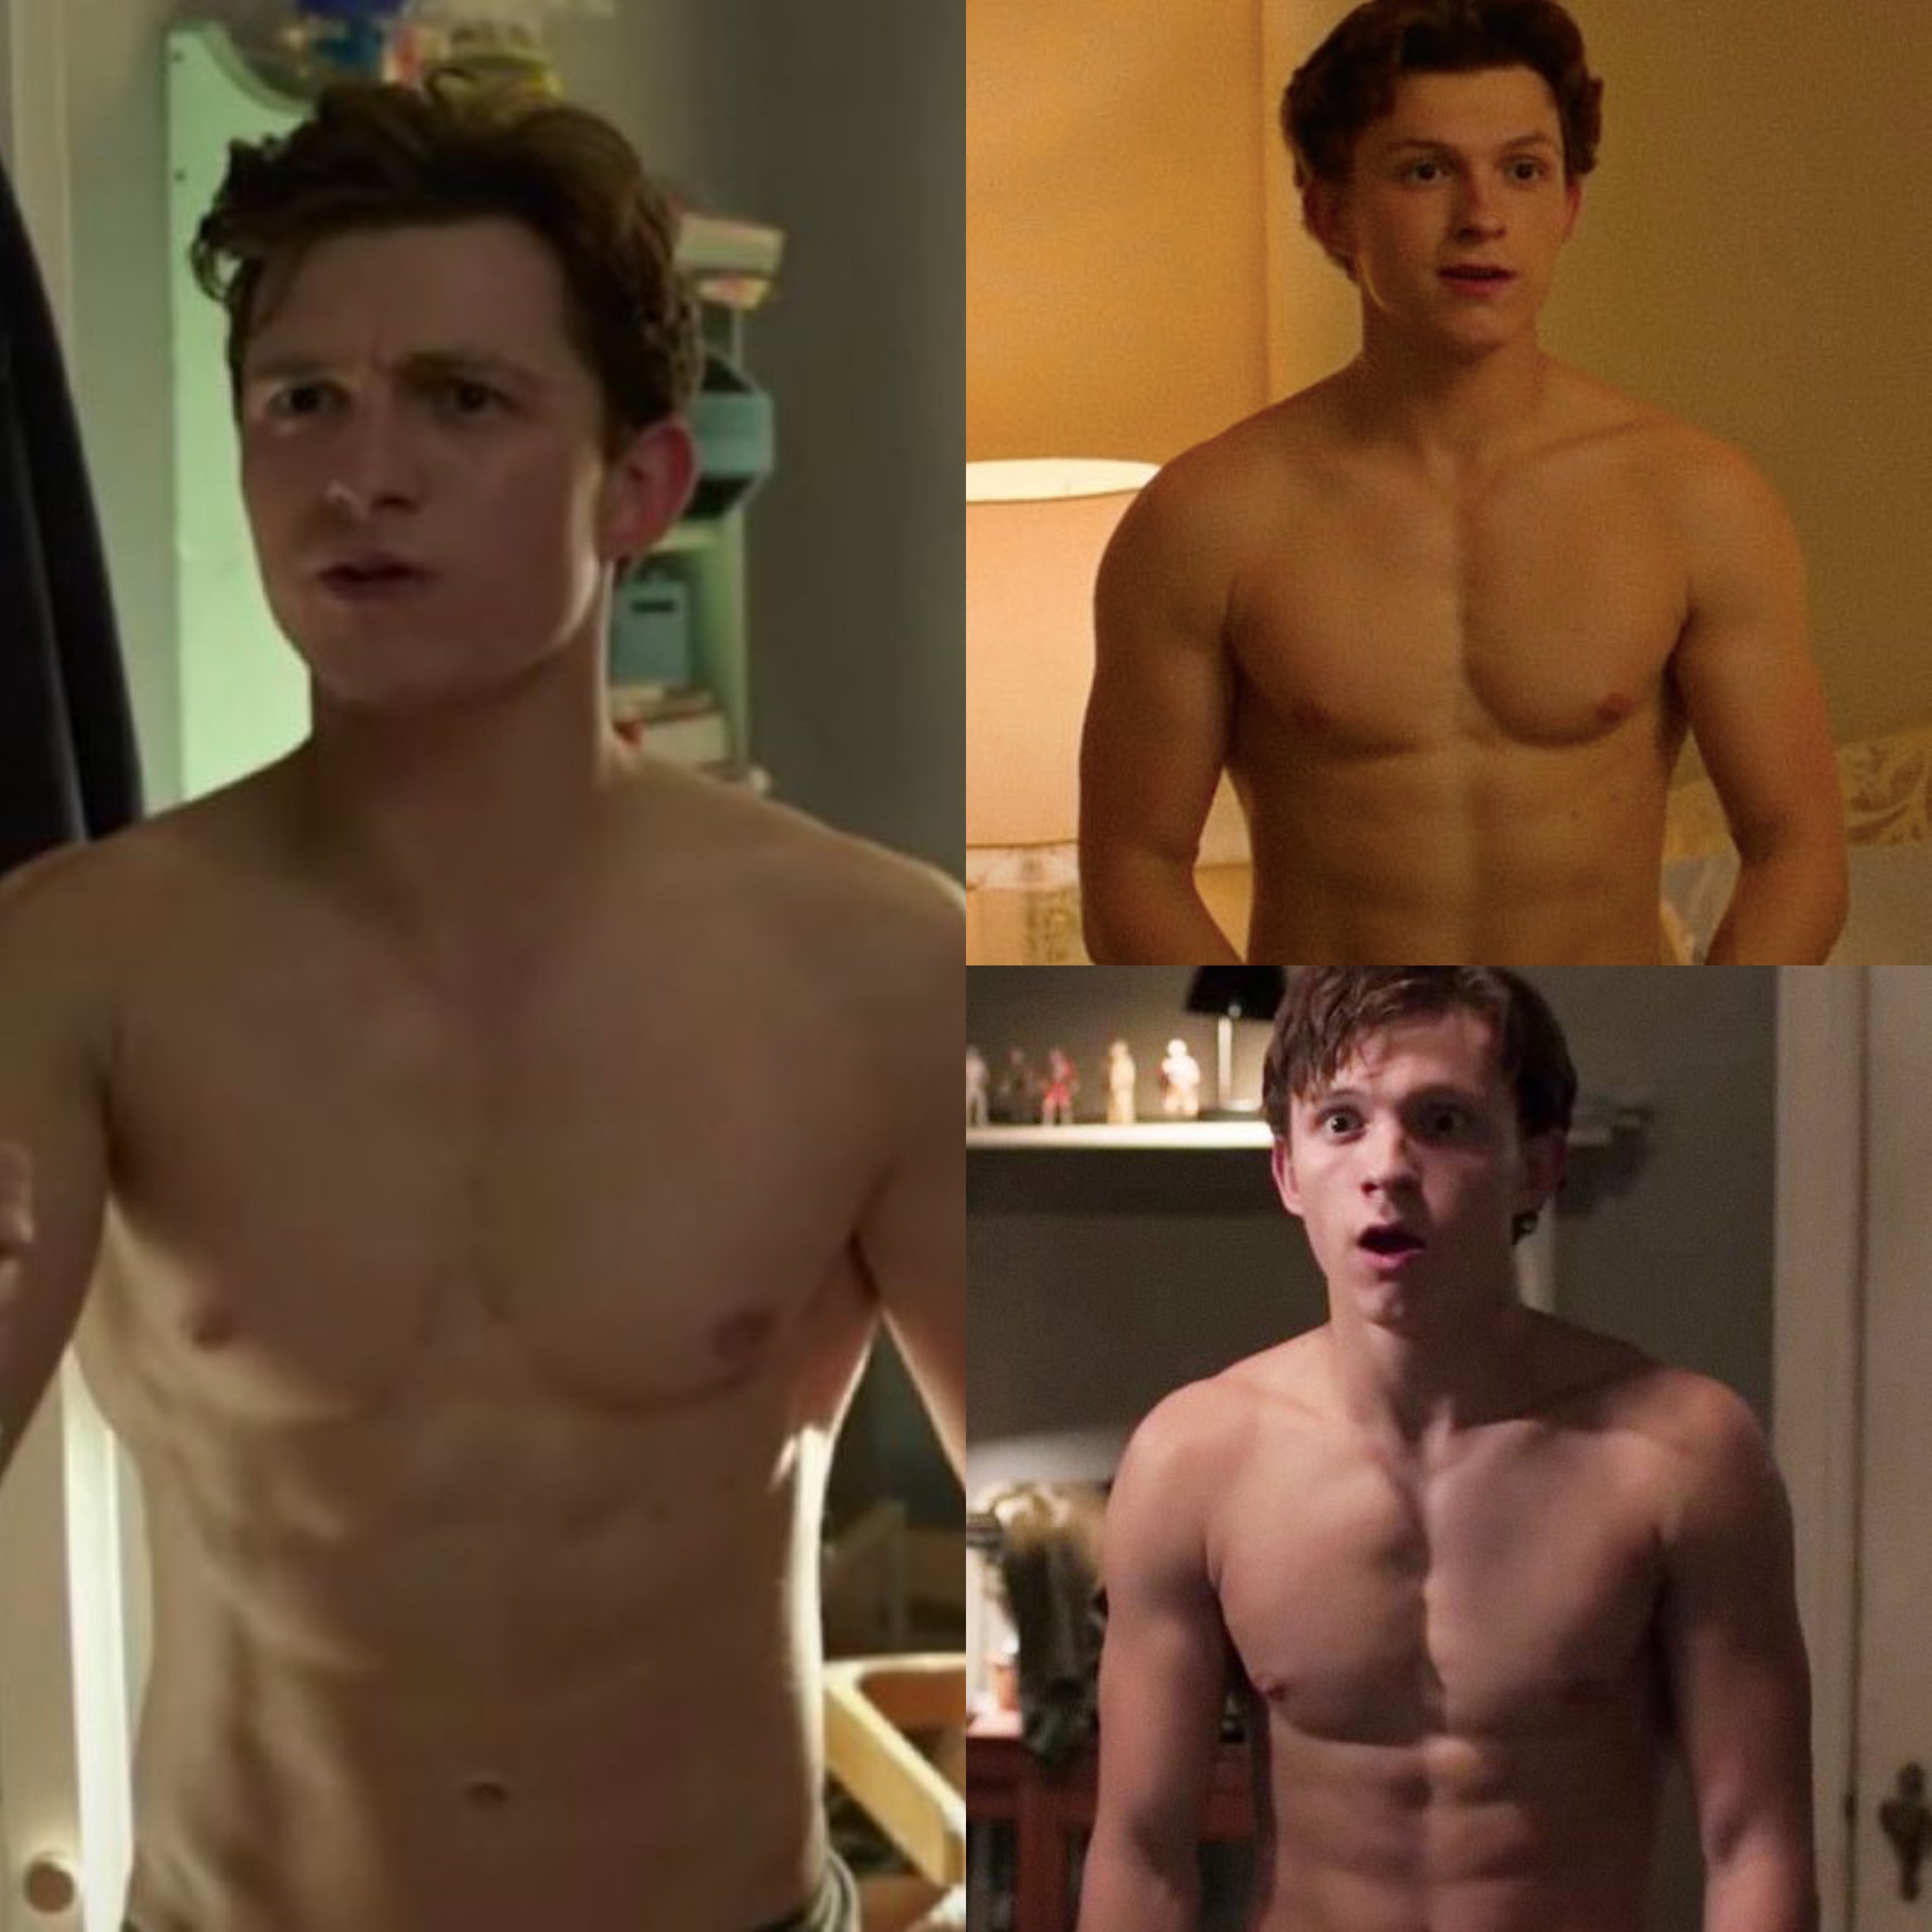 Udelade Klappe Dyrt imaan on X: "tom holland getting caught shirtless in every spider-man movie  has gotta be one of my favorite genres https://t.co/GQQ86uN611" / X